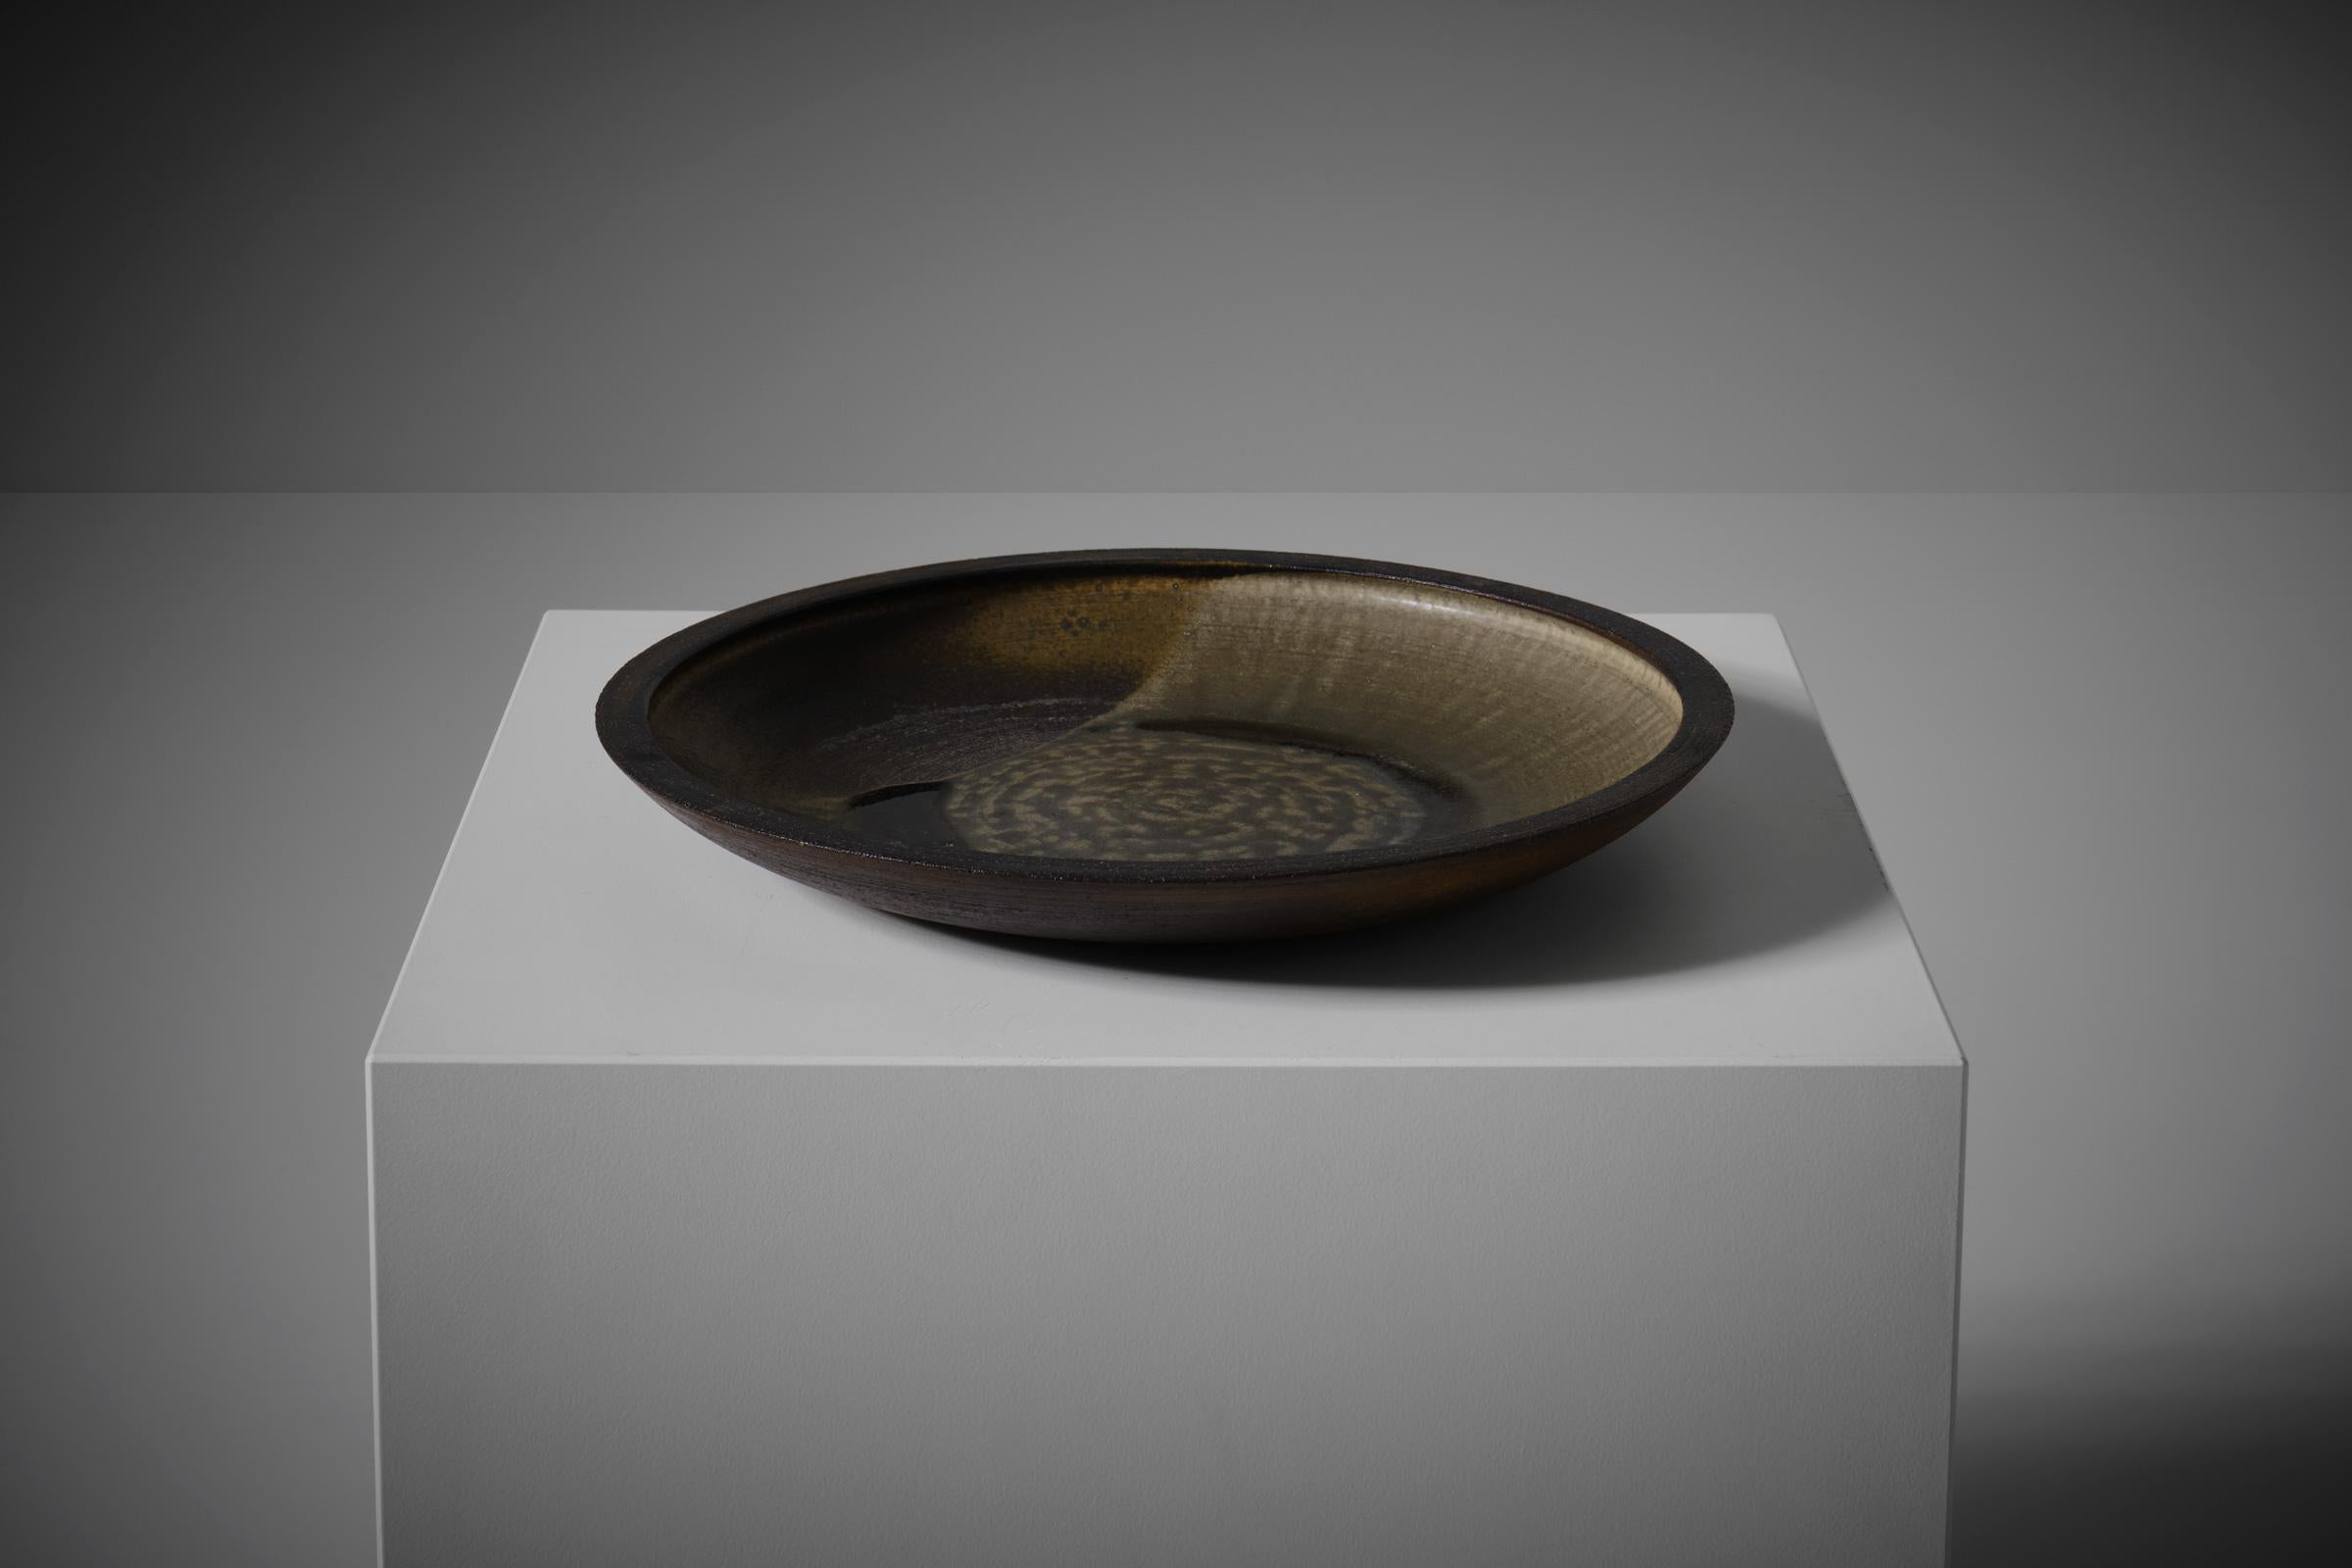 Ceramic centerpiece by Nanni Valentini (1932 -1985) for Ceramica Arcore. Beautiful expressionistic, typical Valentini, decoration on the inner side of the bowl showing different glazes and textured surfaces. The shape of the bowl evokes a sense of